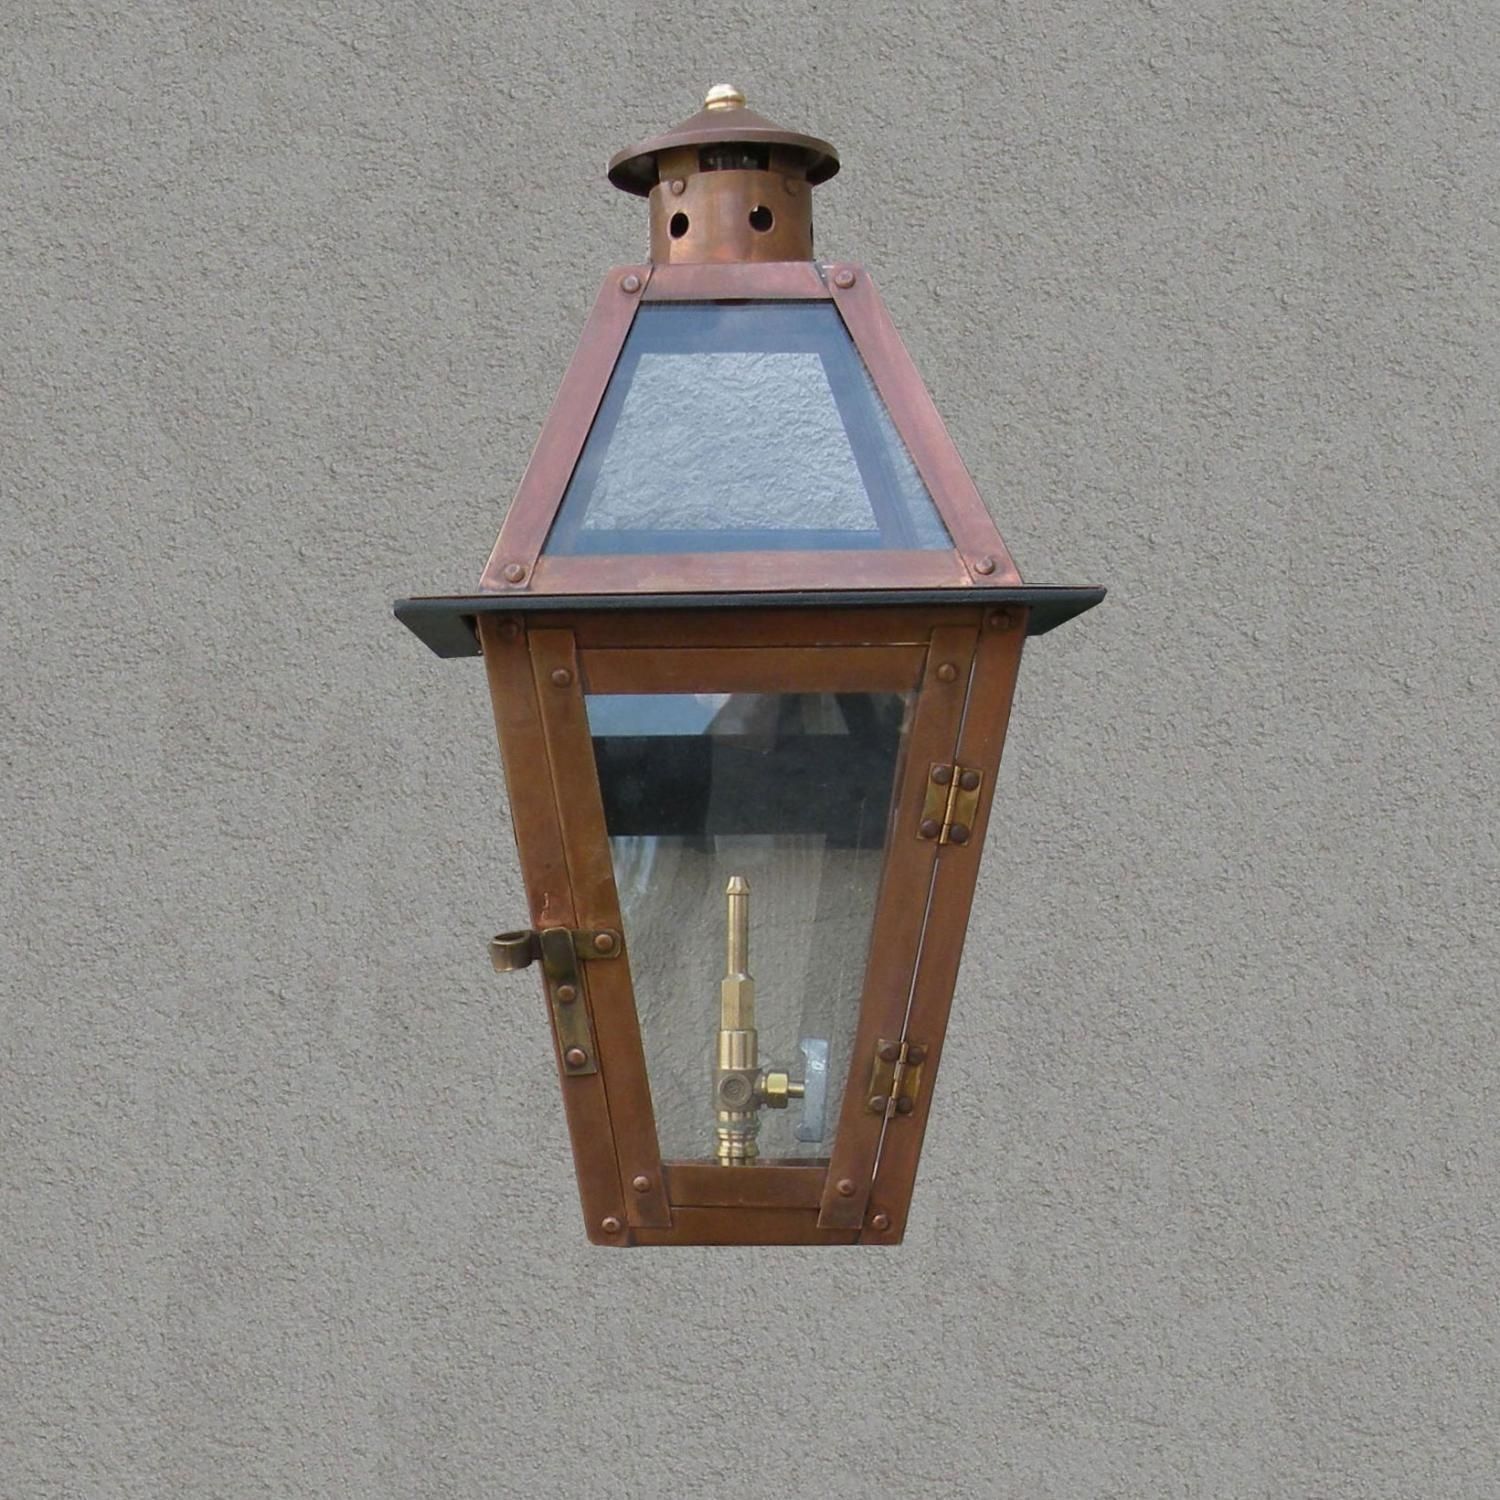 Regency Gl15 Chateau Propane Gas Light With Open Flame Burner And For Outdoor Wall Mount Gas Lights (View 14 of 15)